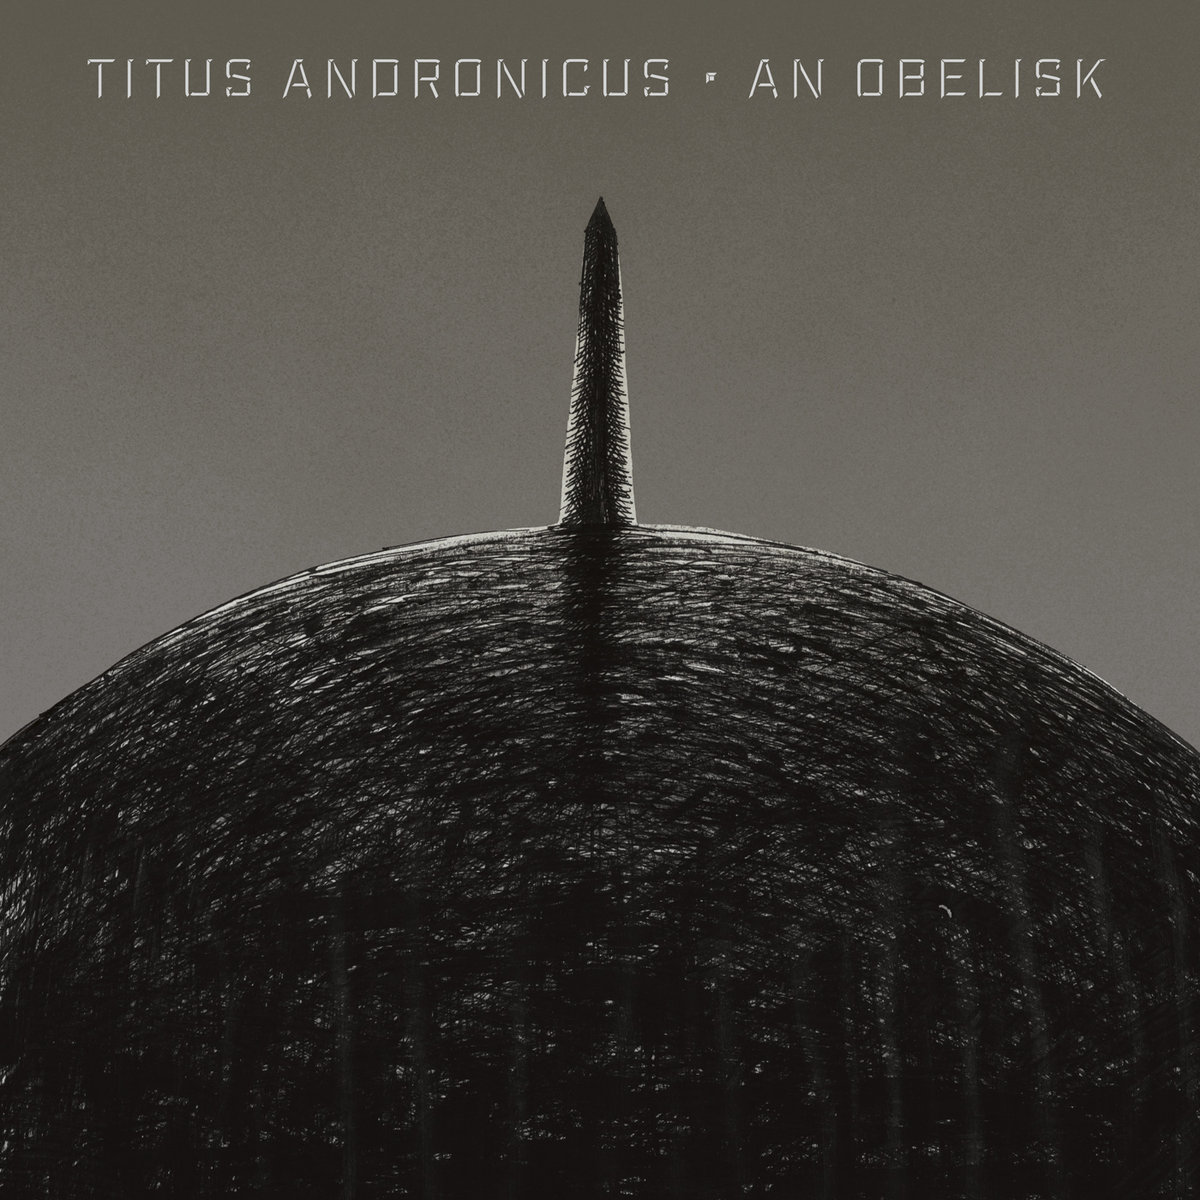 Titus Andronicus An Obelisk